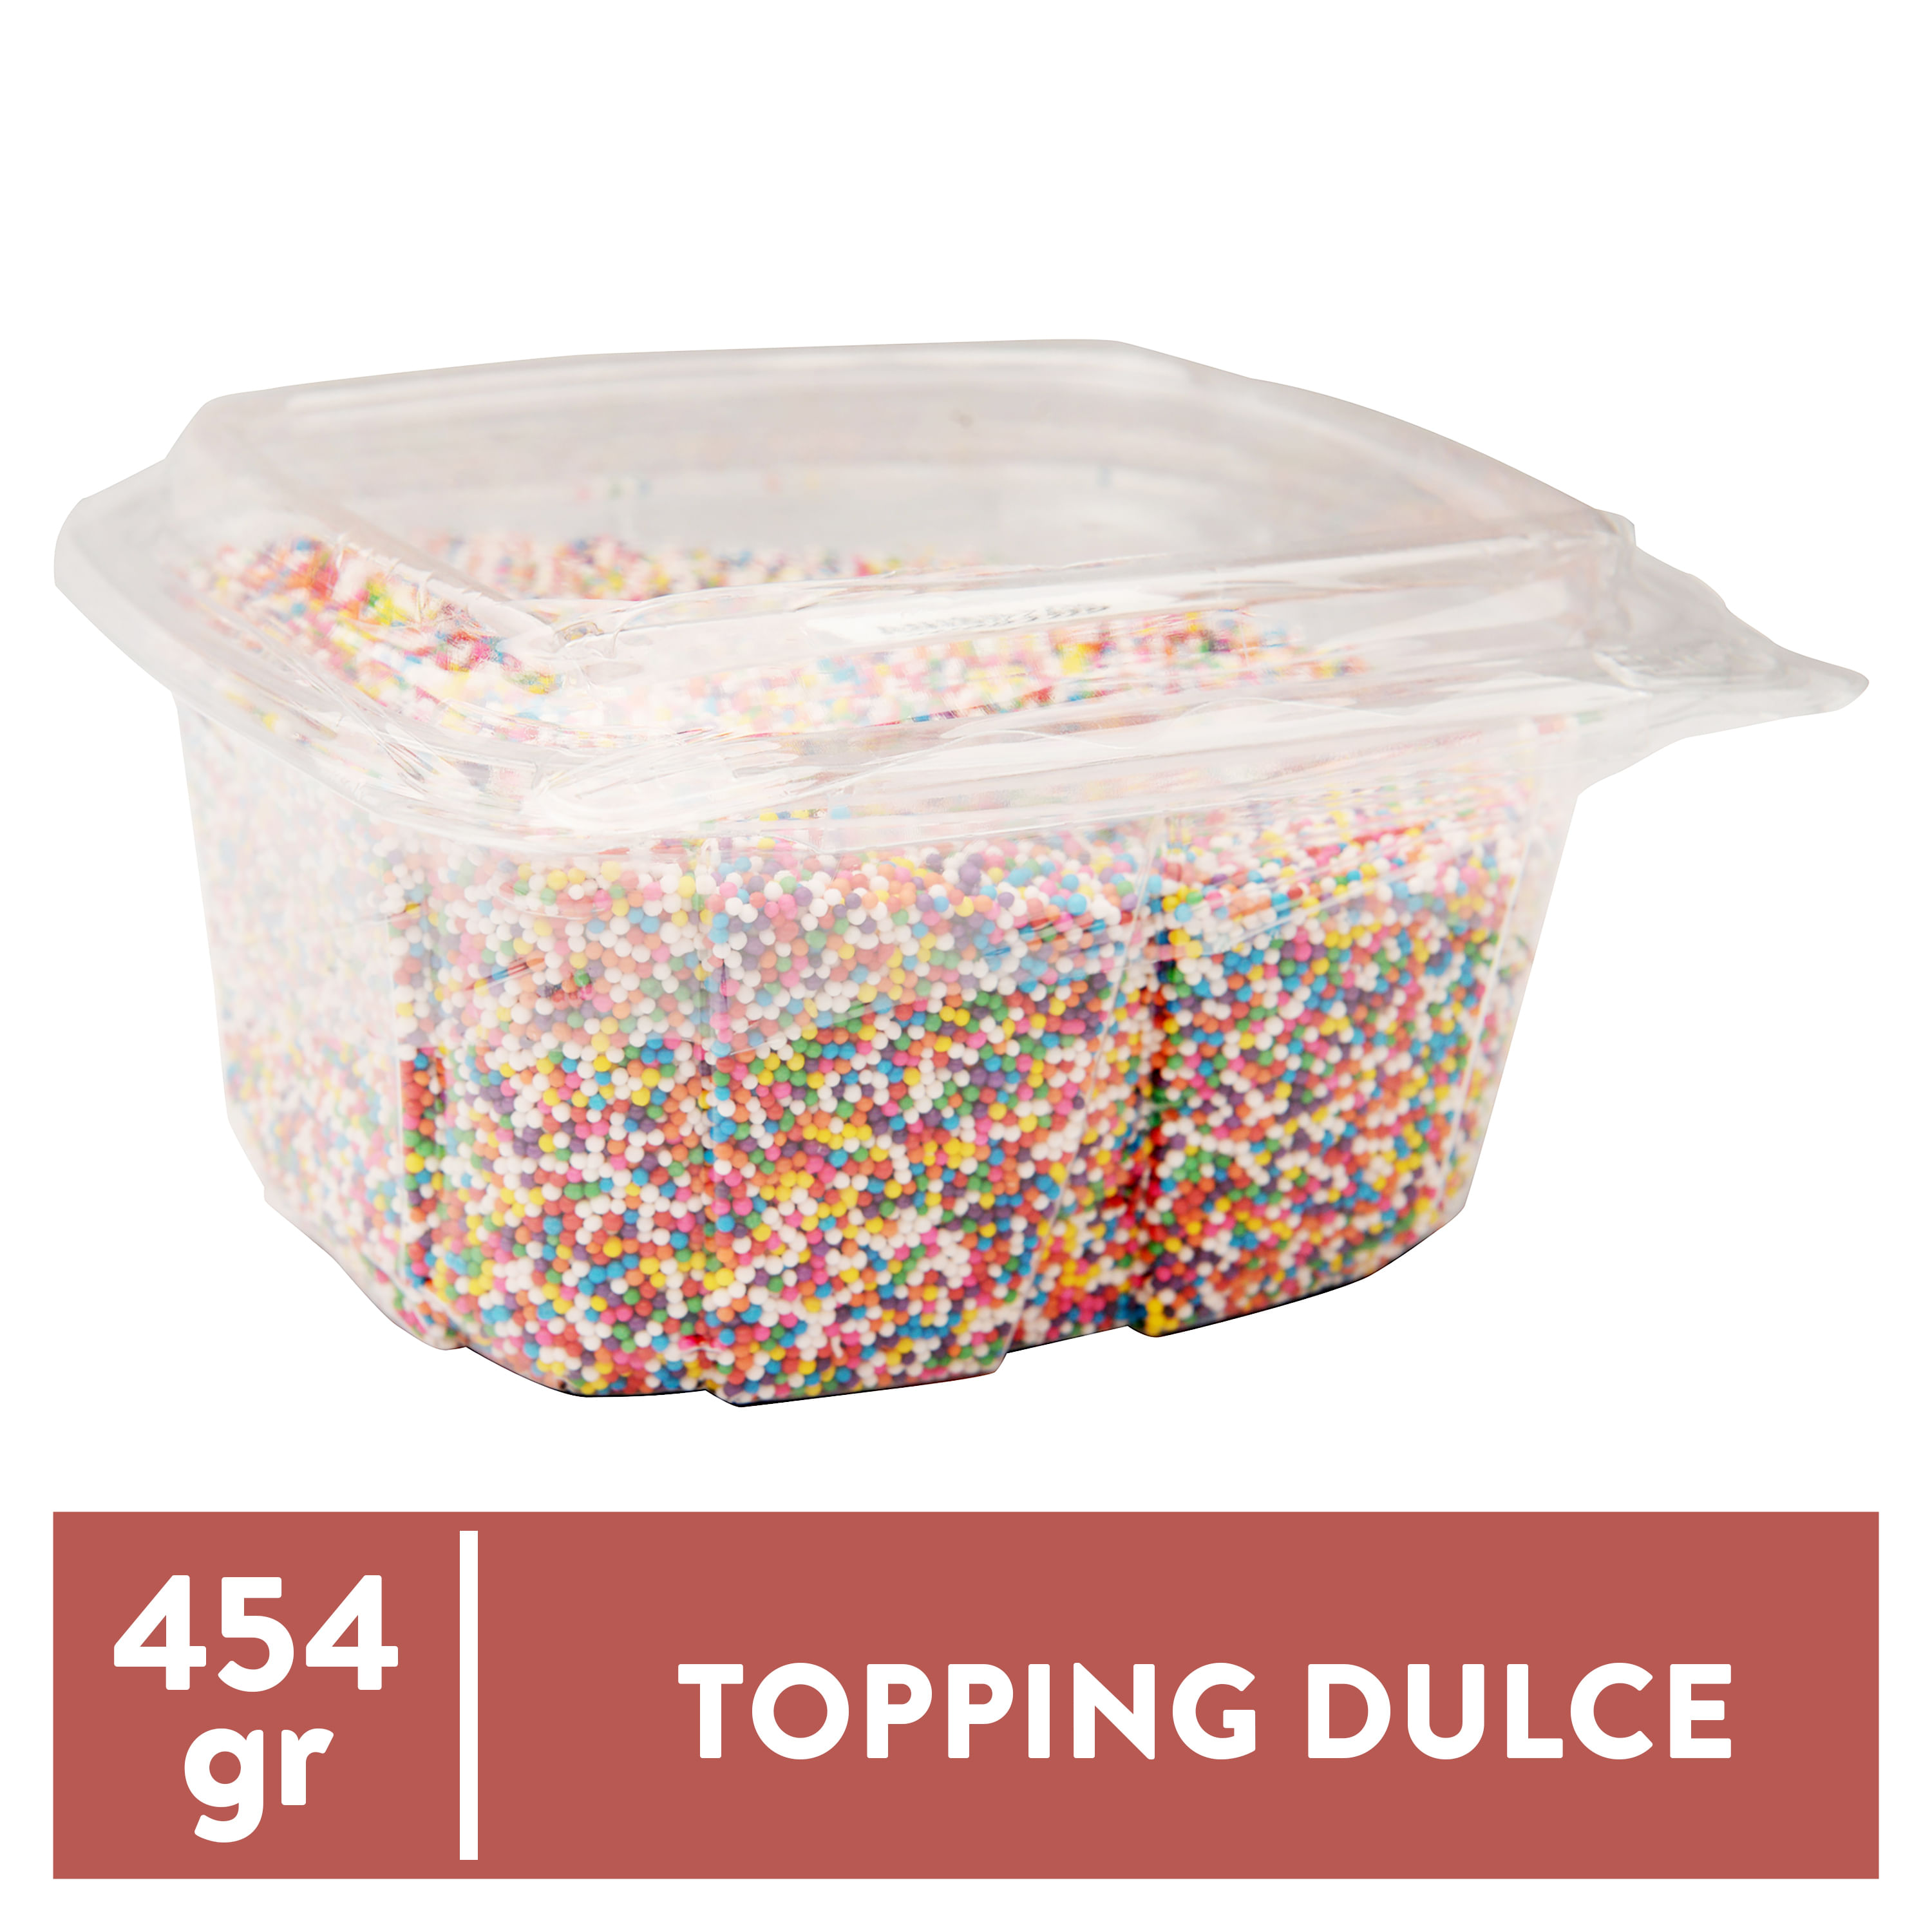 Anisillo-Mada-Dulce-Topping-454gr-1-30562